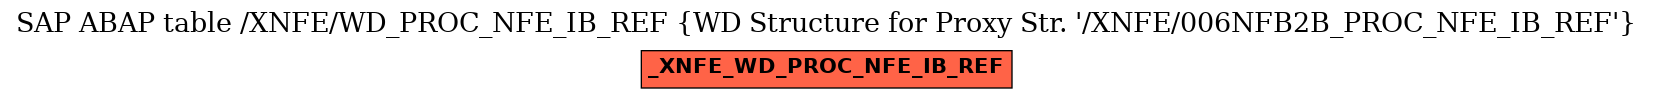 E-R Diagram for table /XNFE/WD_PROC_NFE_IB_REF (WD Structure for Proxy Str. 